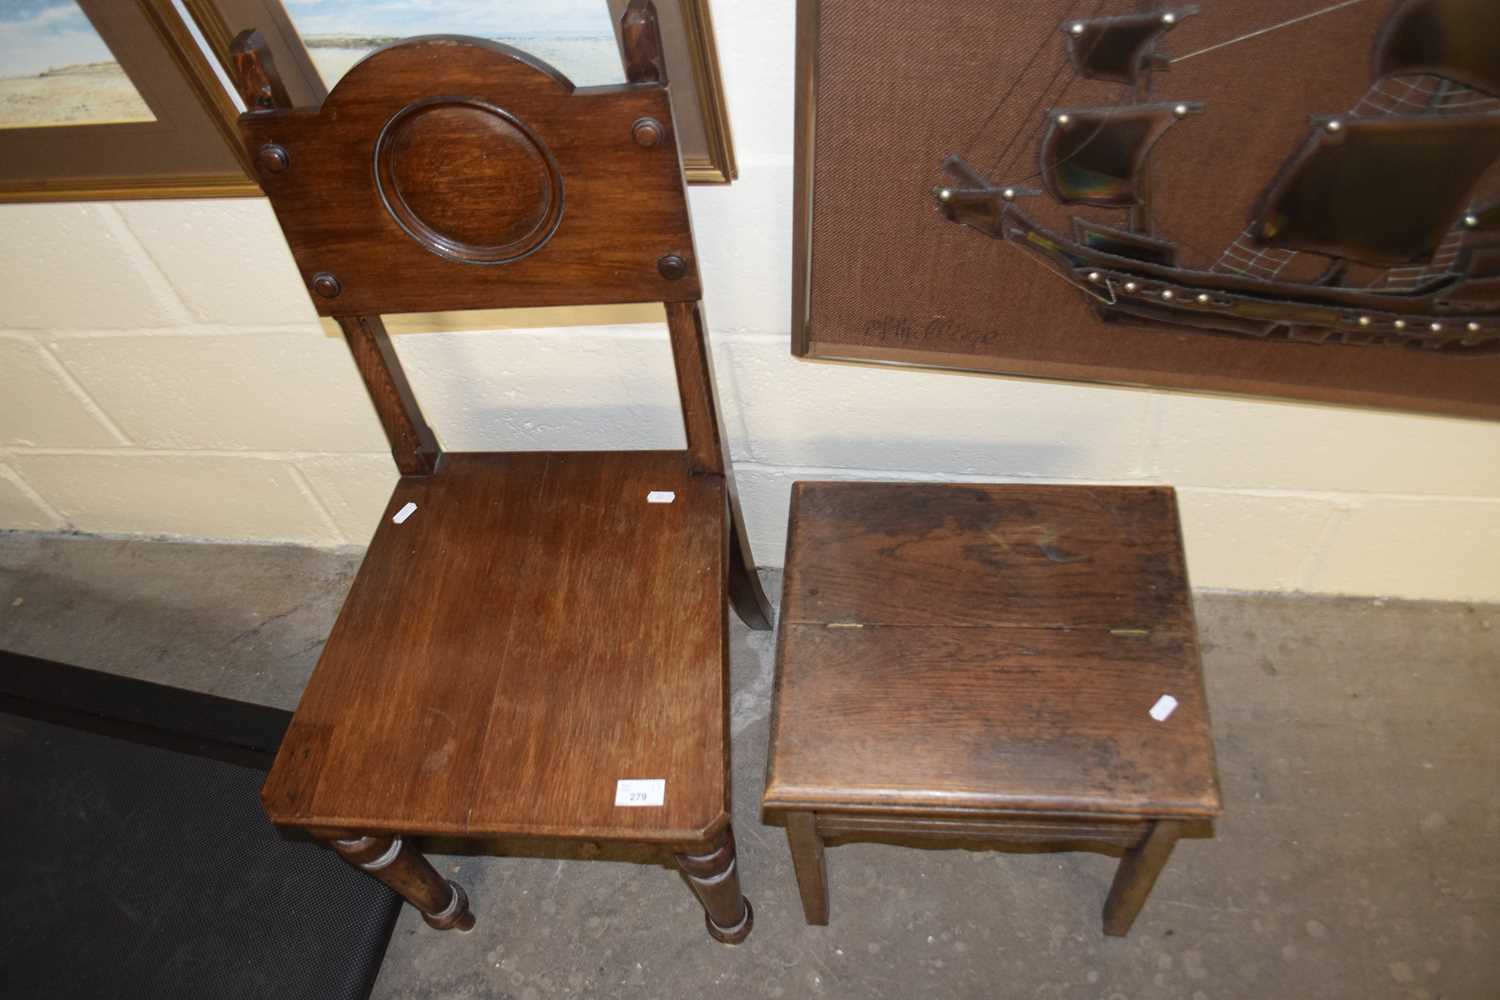 Late Victorian hardwood chair with circular decoration to the back together with a small flip top